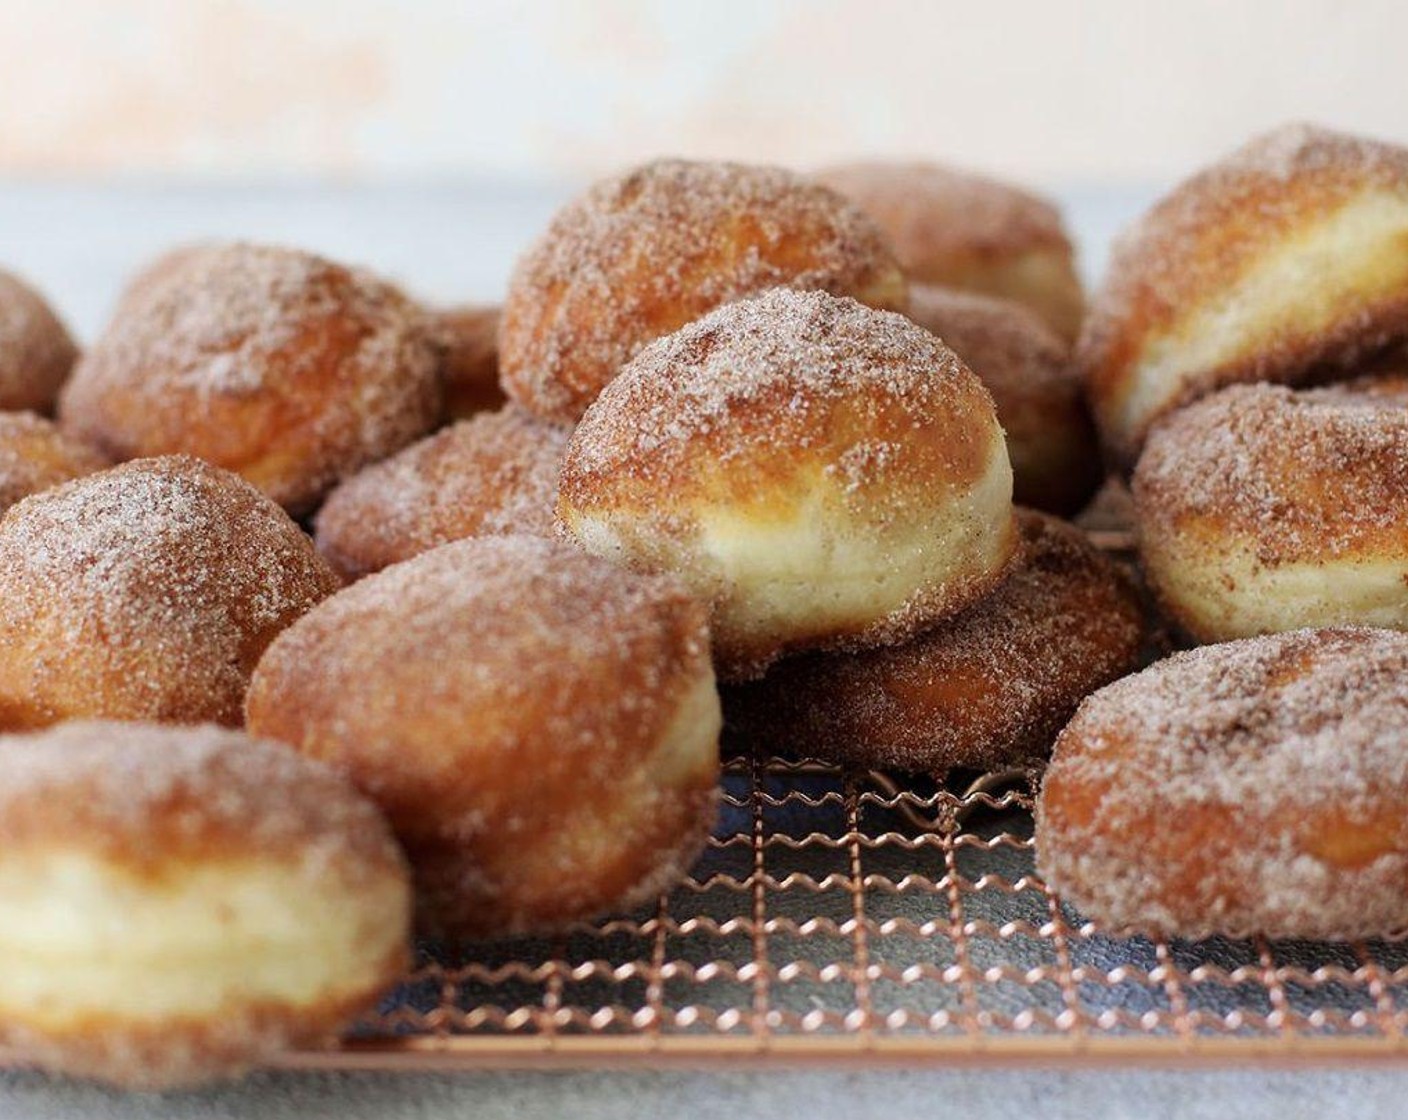 step 7 Submerge the donuts in the heated oil about 1-2 minutes on each side. Remove from the oil and put them directly into the cinnamon and sugar. Toss around and make sure they are coated before placing them on a cooling rack. Repeat with second half of the dough.